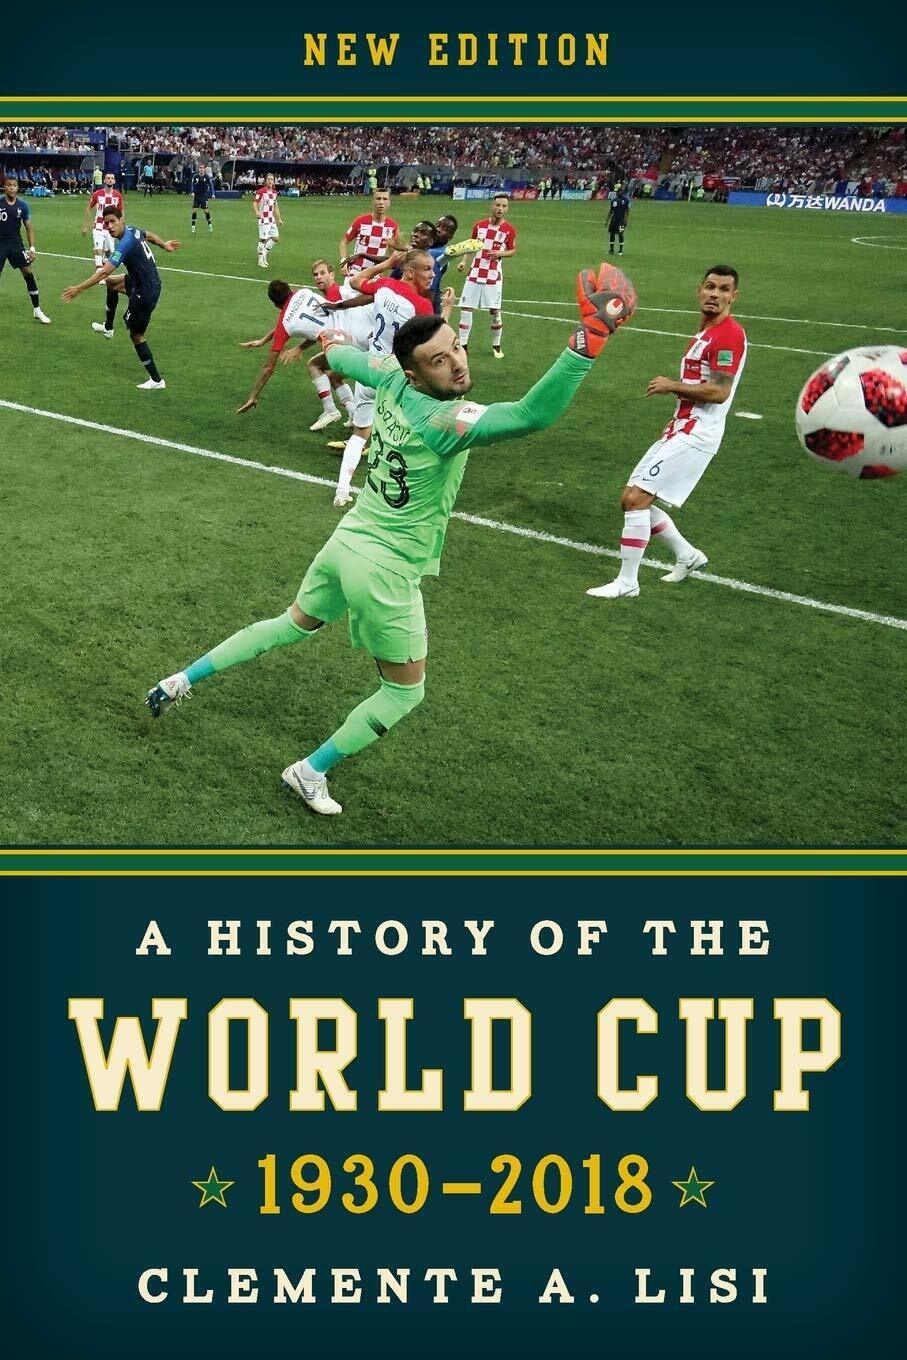 A History of the World Cup - Clemente Lisi - Rowman & Littlefield, 2019